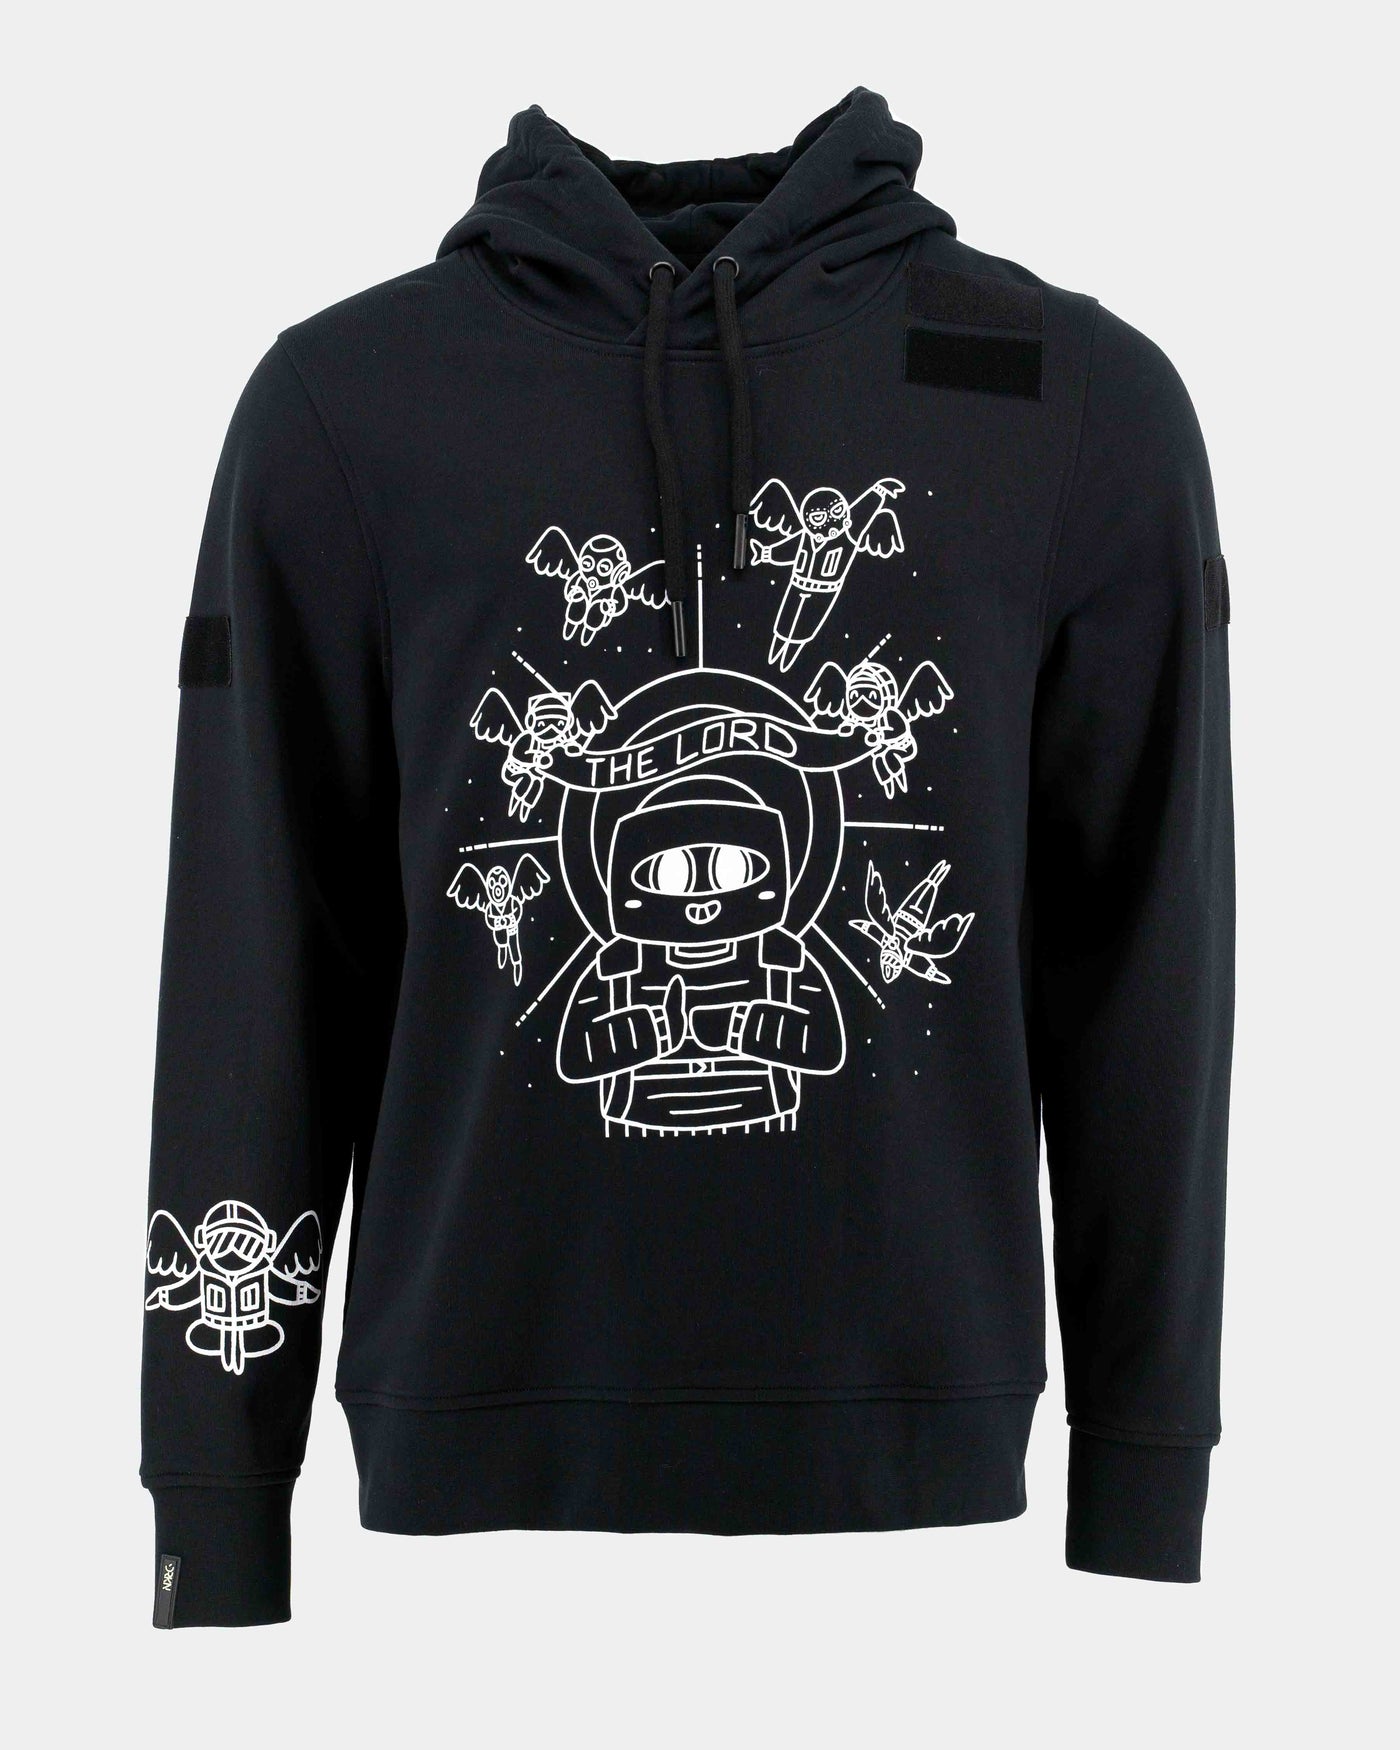 A black hoodie with comic con art prints from the creator Sau-Siege.